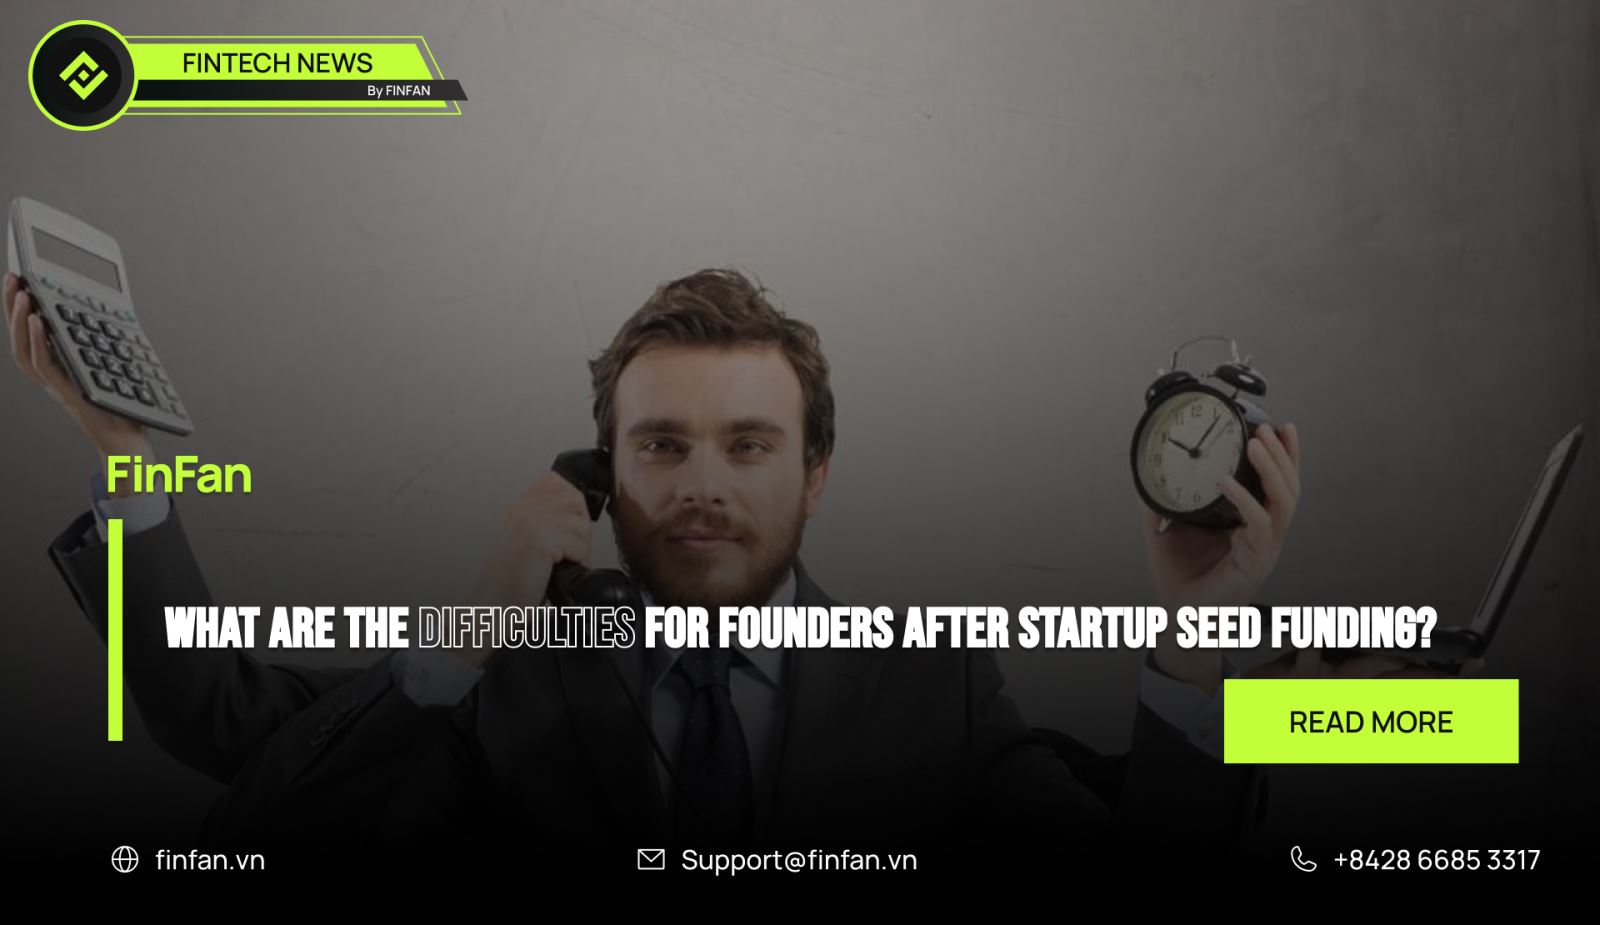 Startup seed funding – What are the difficulties for founders after startup seed funding?